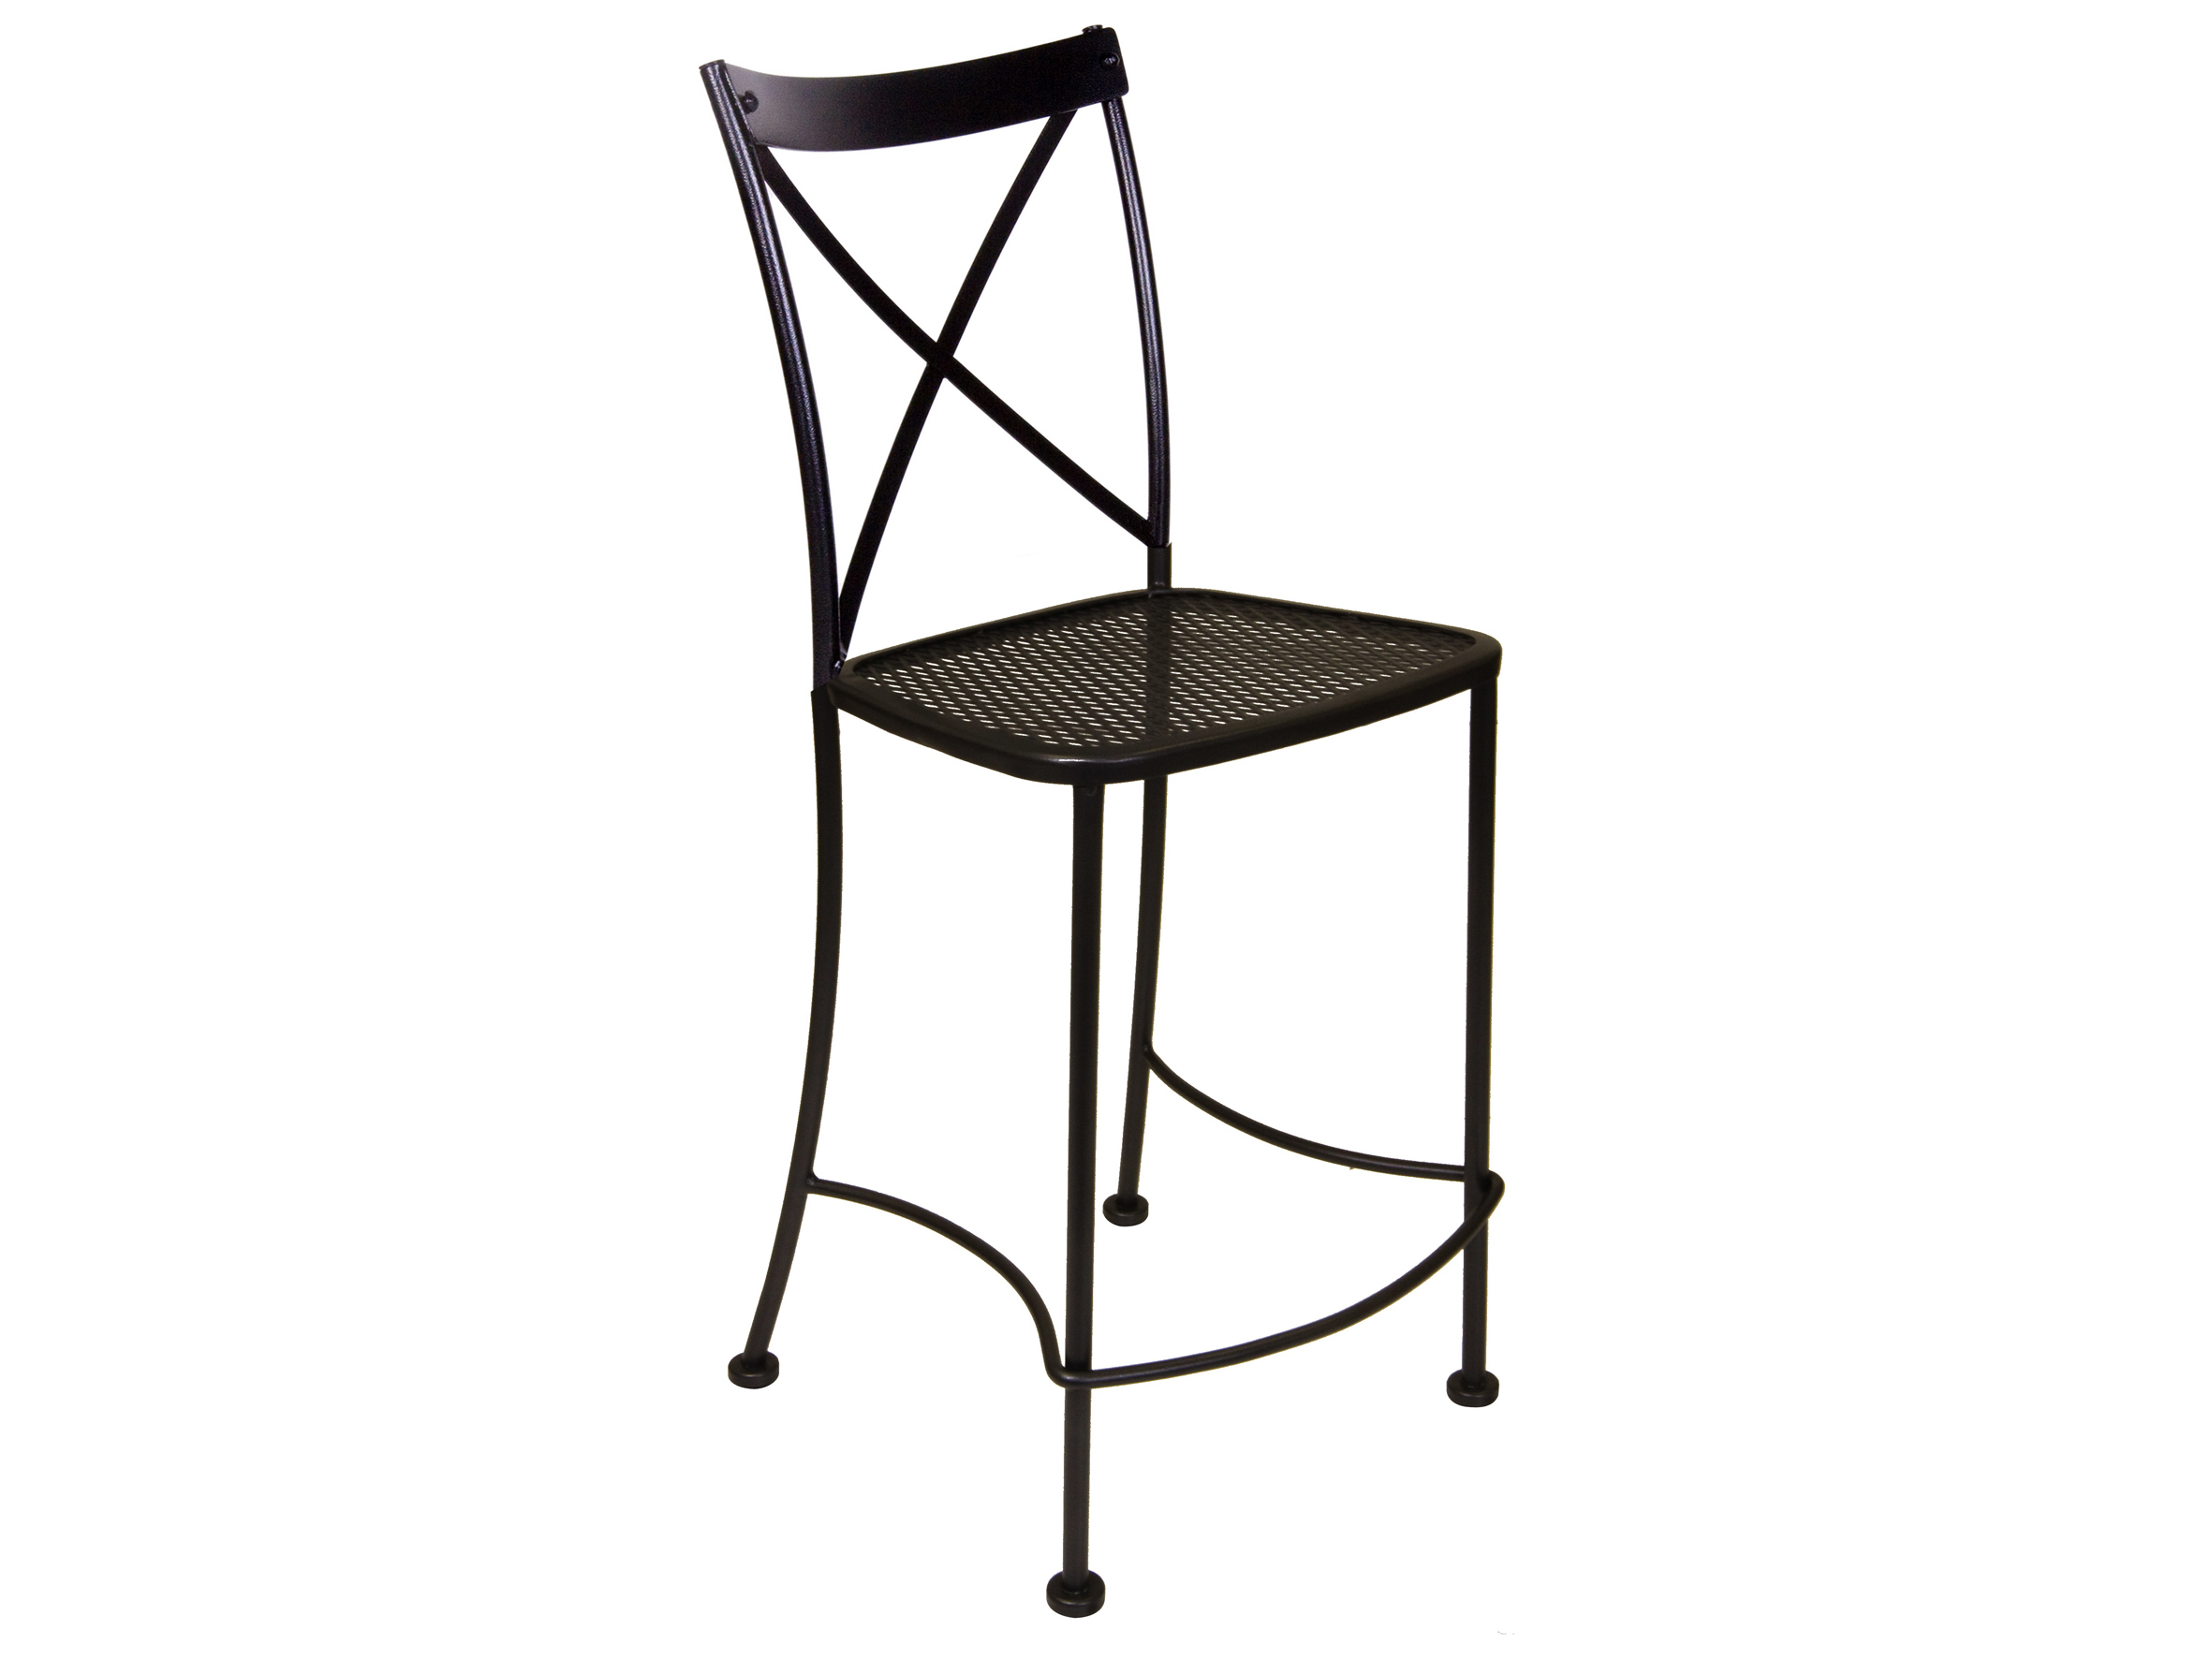 Ow Lee Villa Wrought Iron Counter Stool, Wrought Iron Bar Stools With Arms